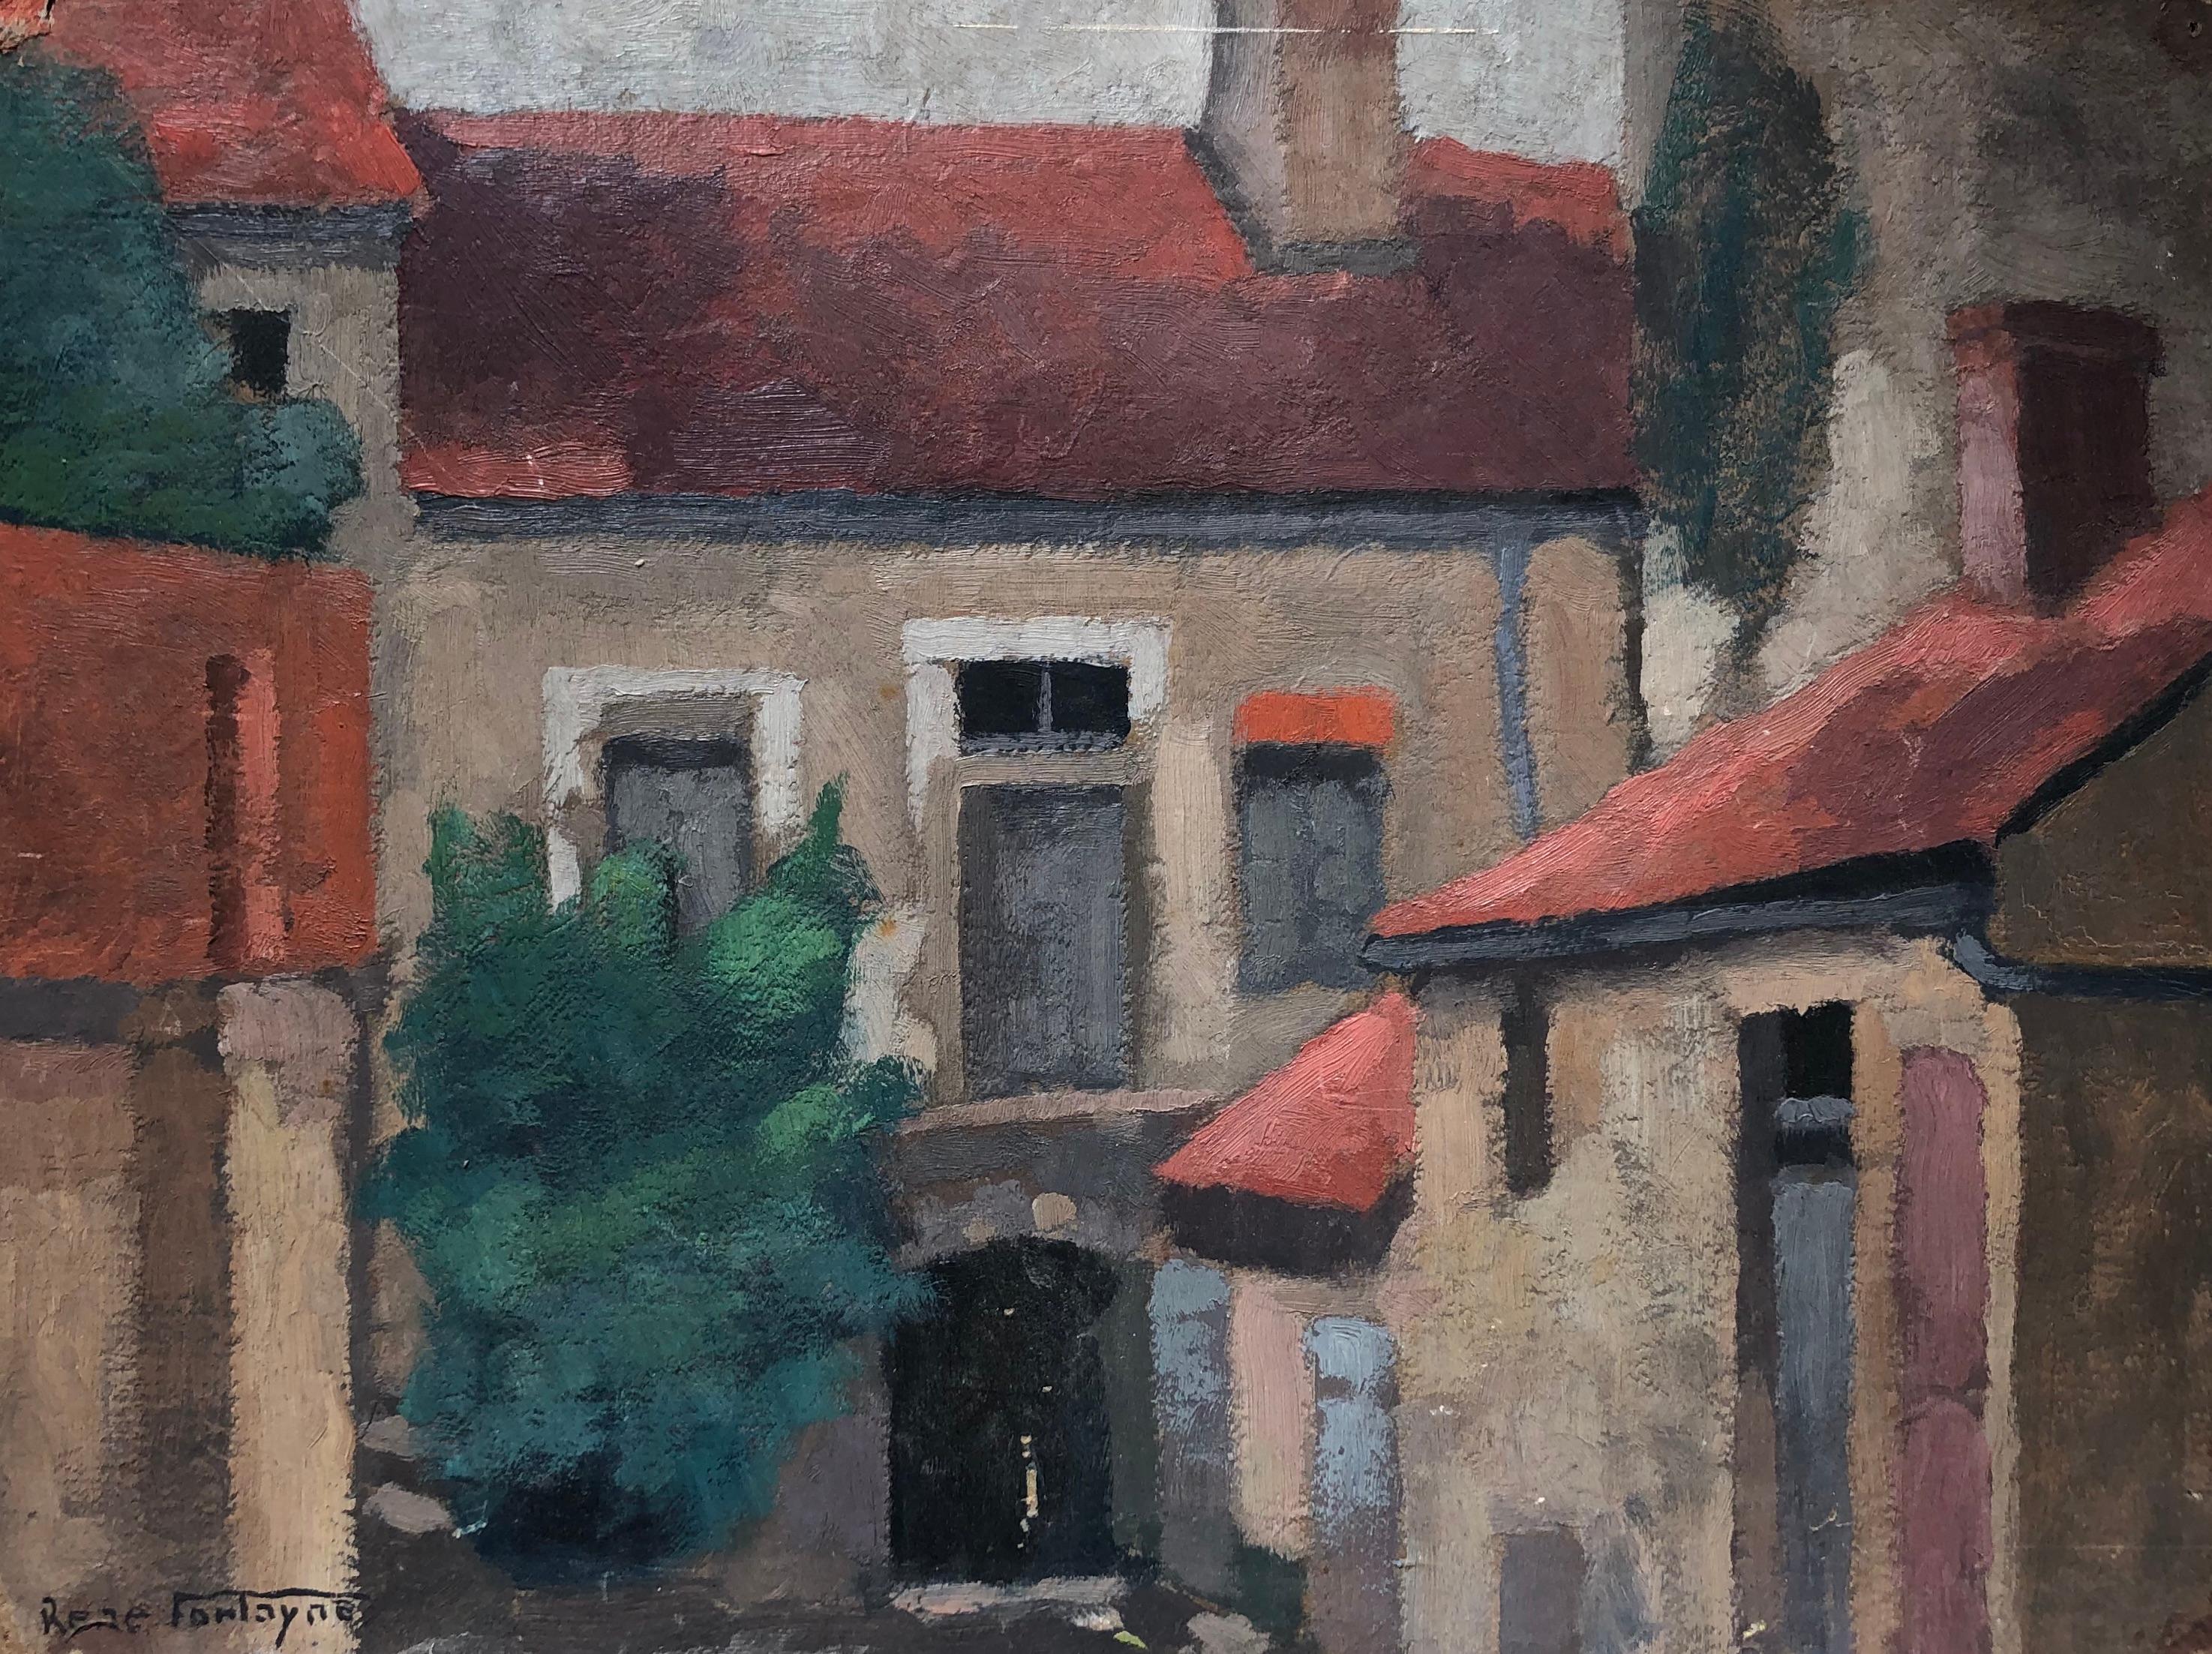 René Fontayne (1892-1952)
Houses.
Oil on cardboard.
Small scratches, small lack of paint.
Damaged left side corners.
28.5 x 38 cm